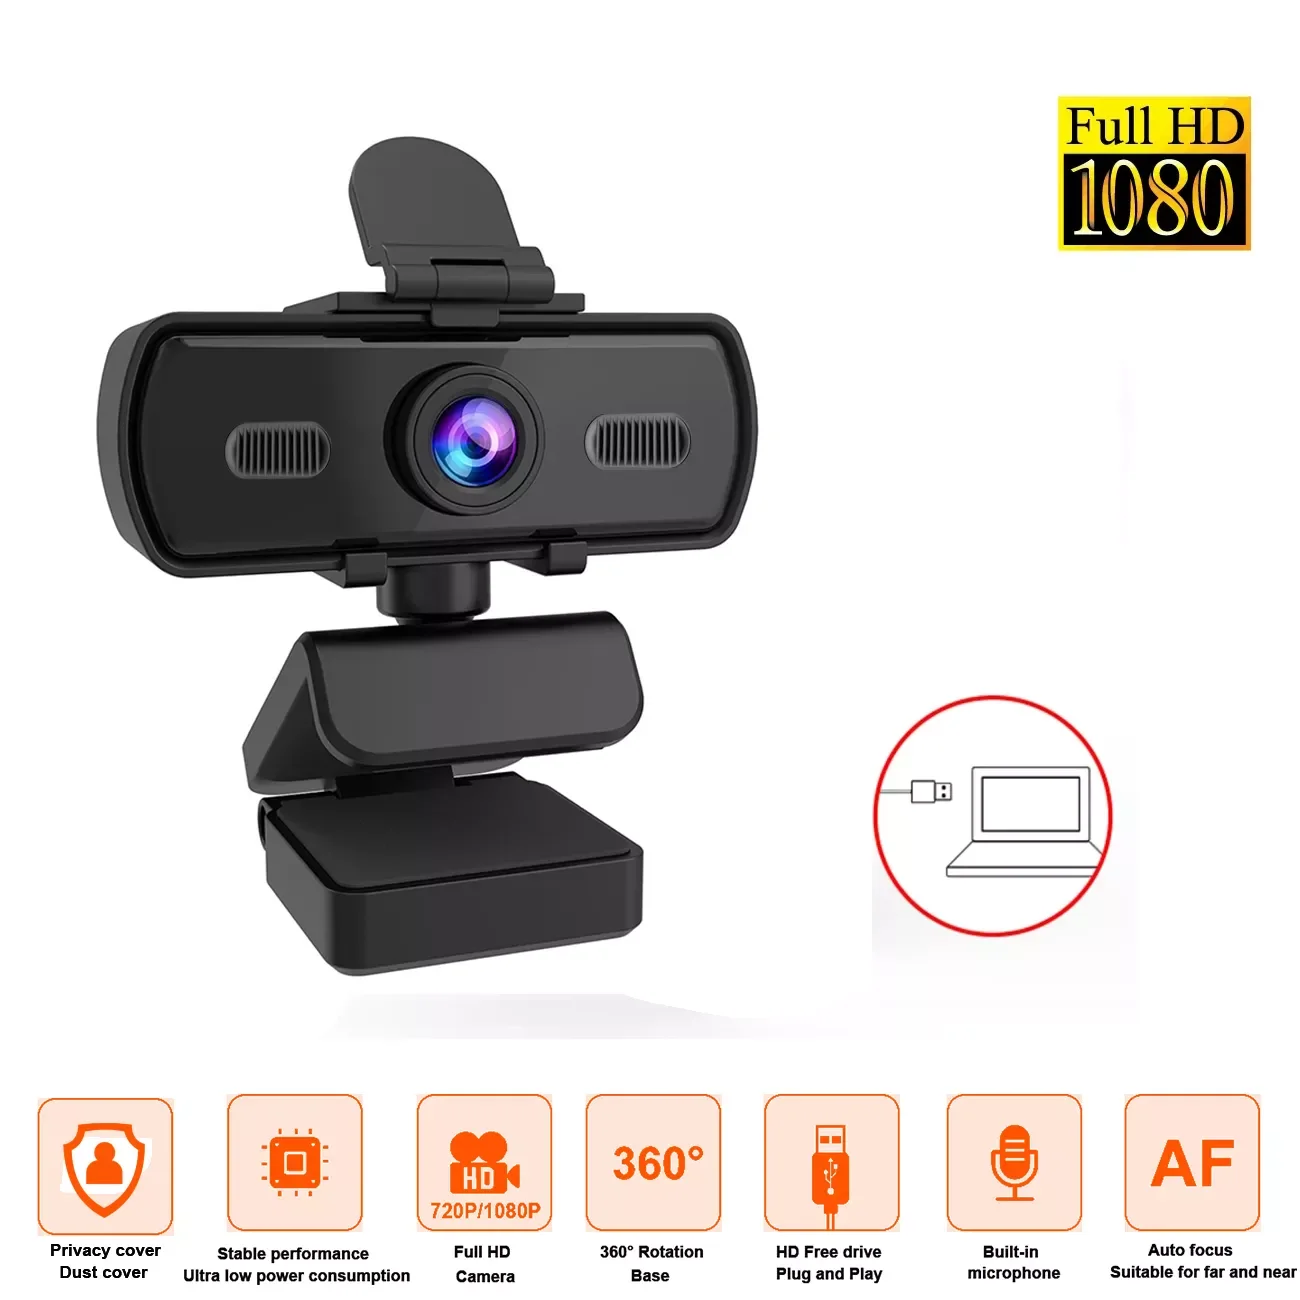 

Webcam with Mic Full HD 1080P USB Web camera for Computer PC Laptop Desktop for Conference Study Video Calling, Live Streaming